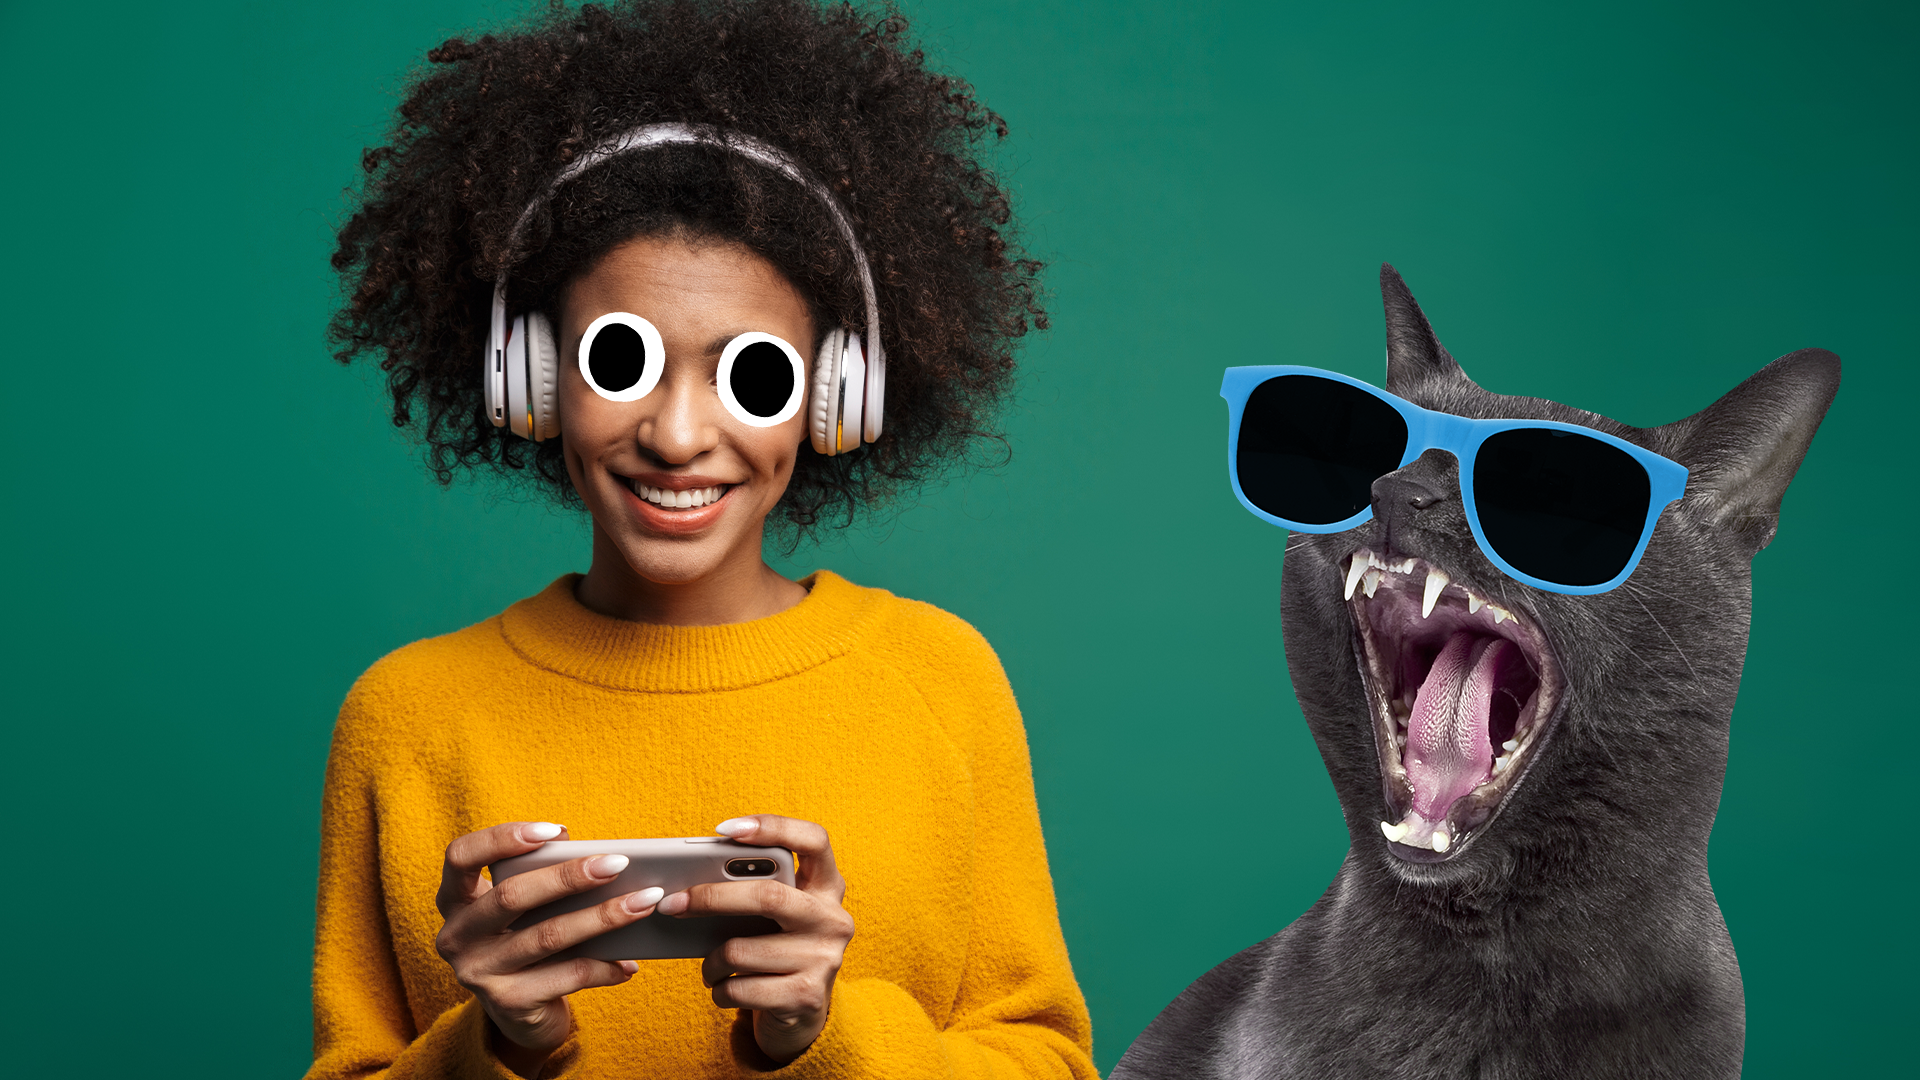 A woman listens to music on big headphones while a cat sings along